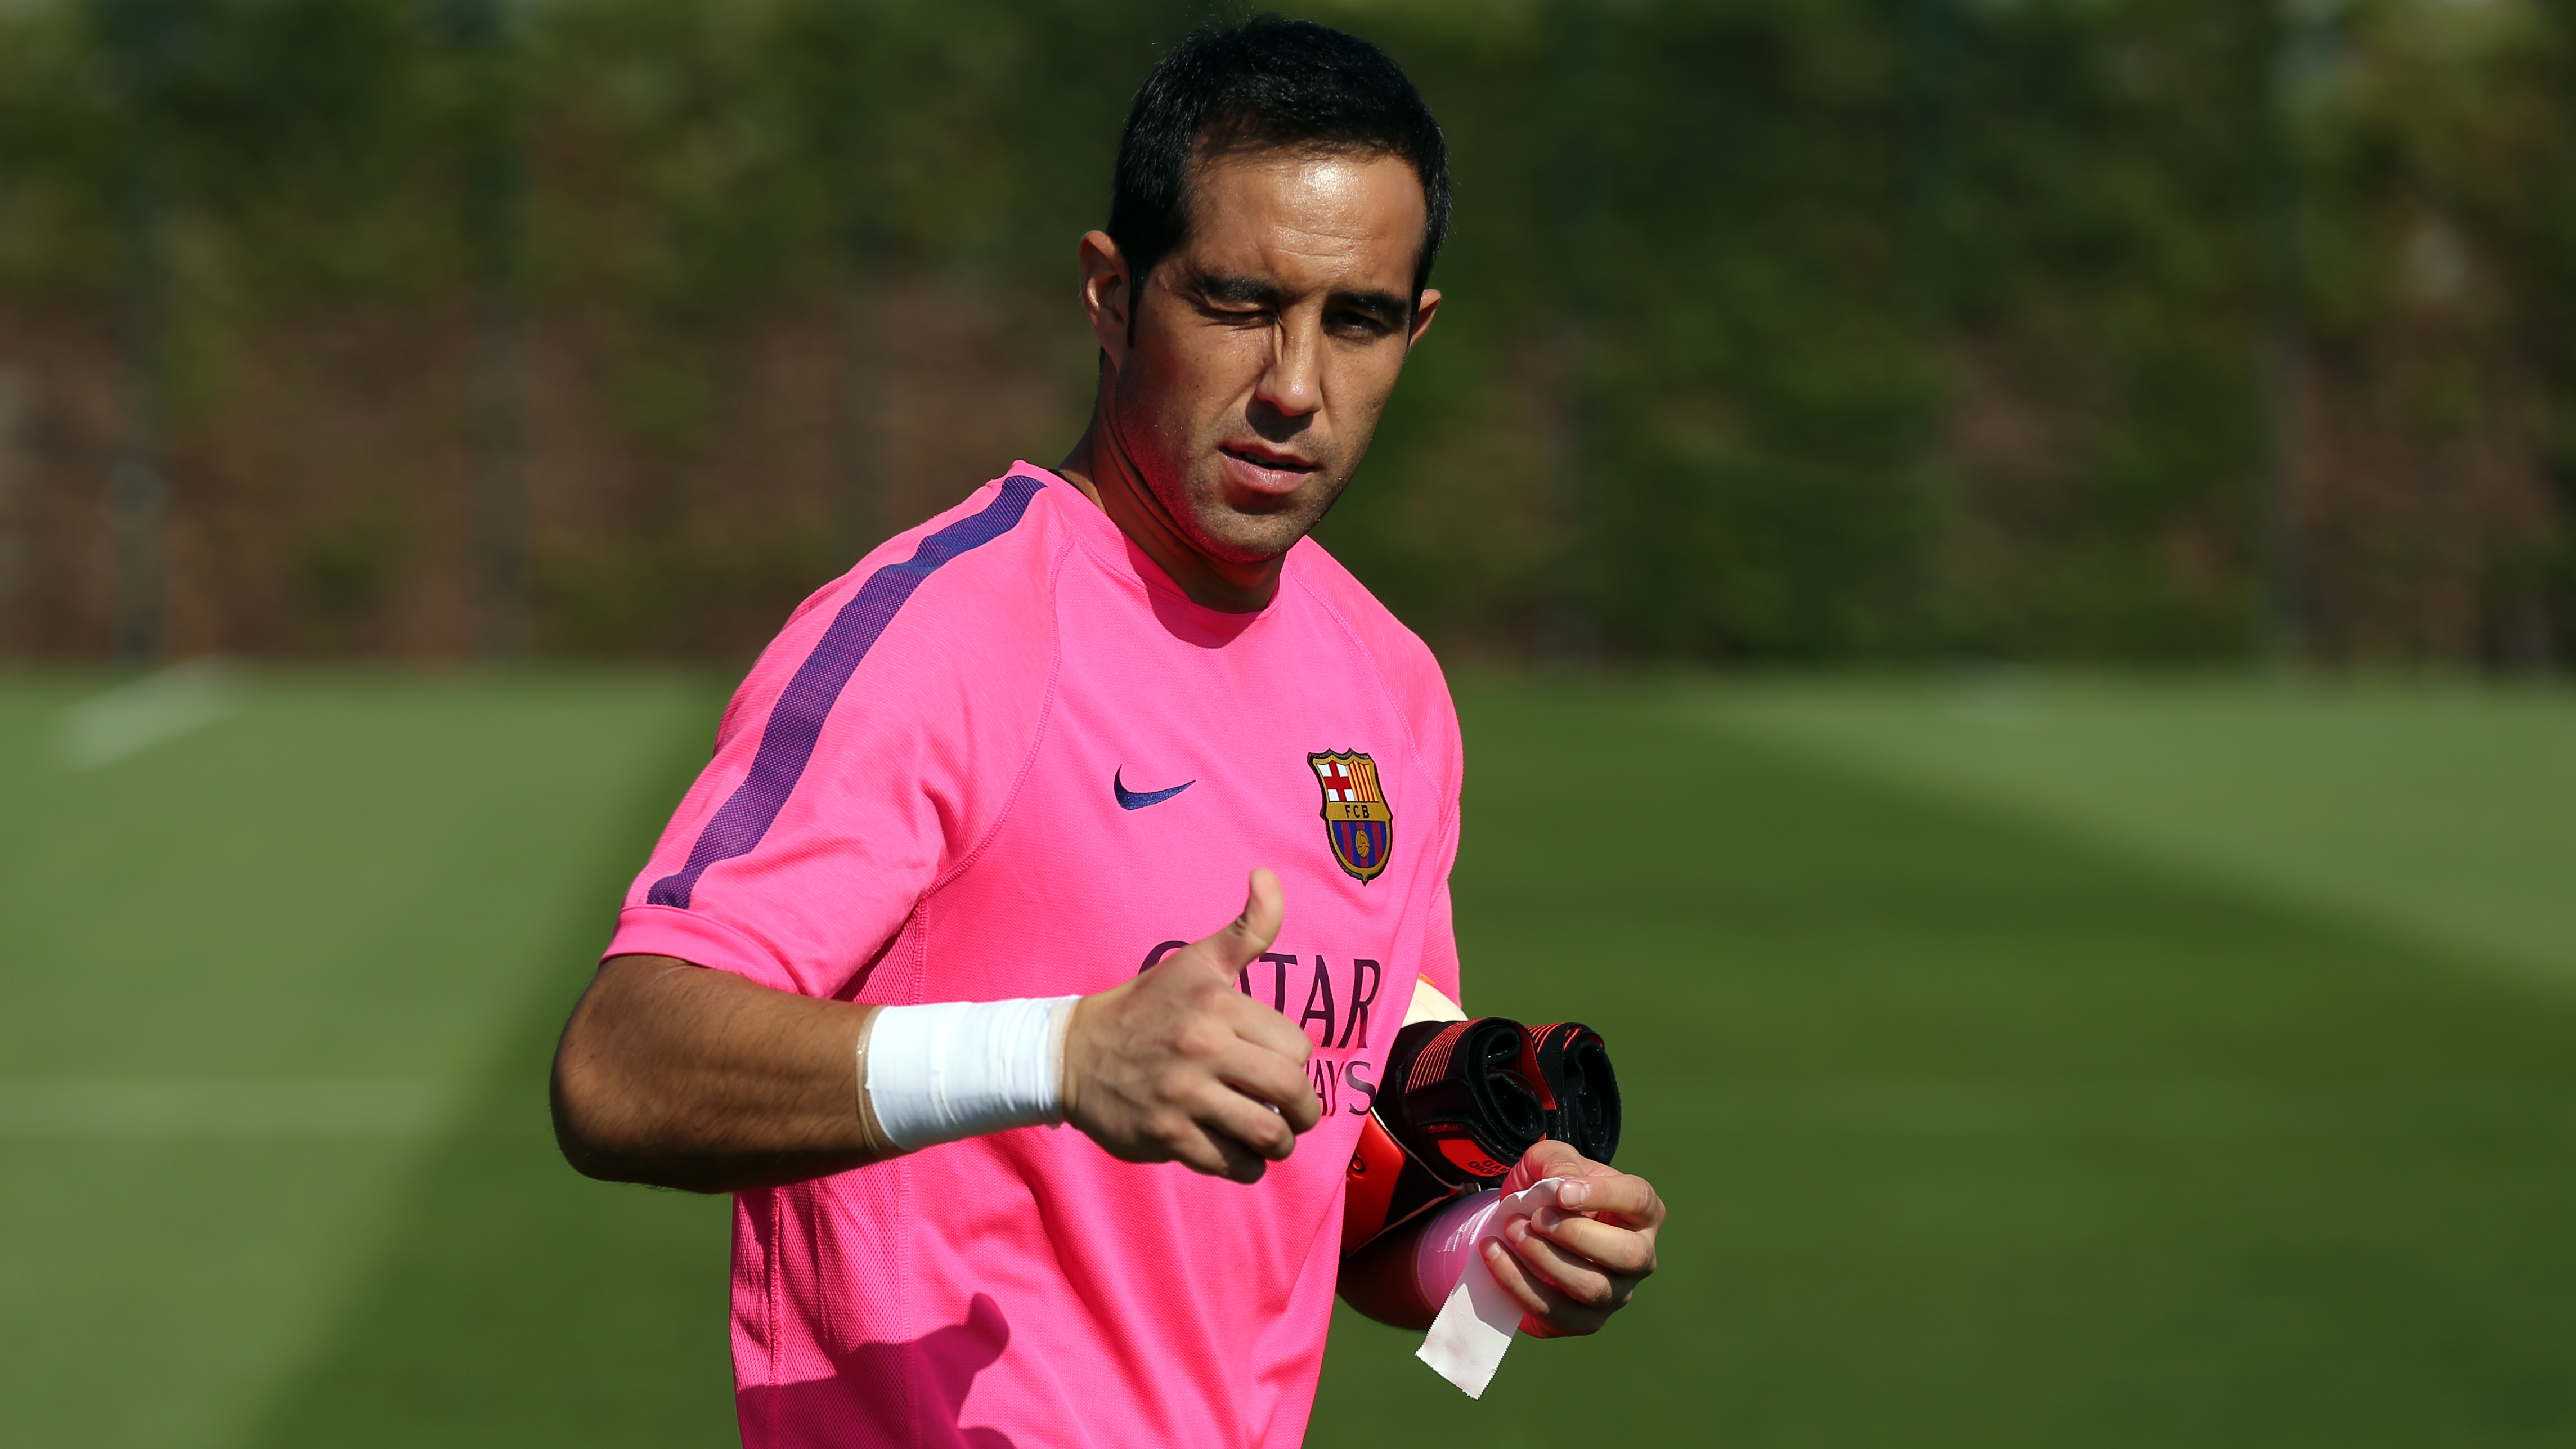 Claudio Bravo: "It's a matter of adapting to the new system"